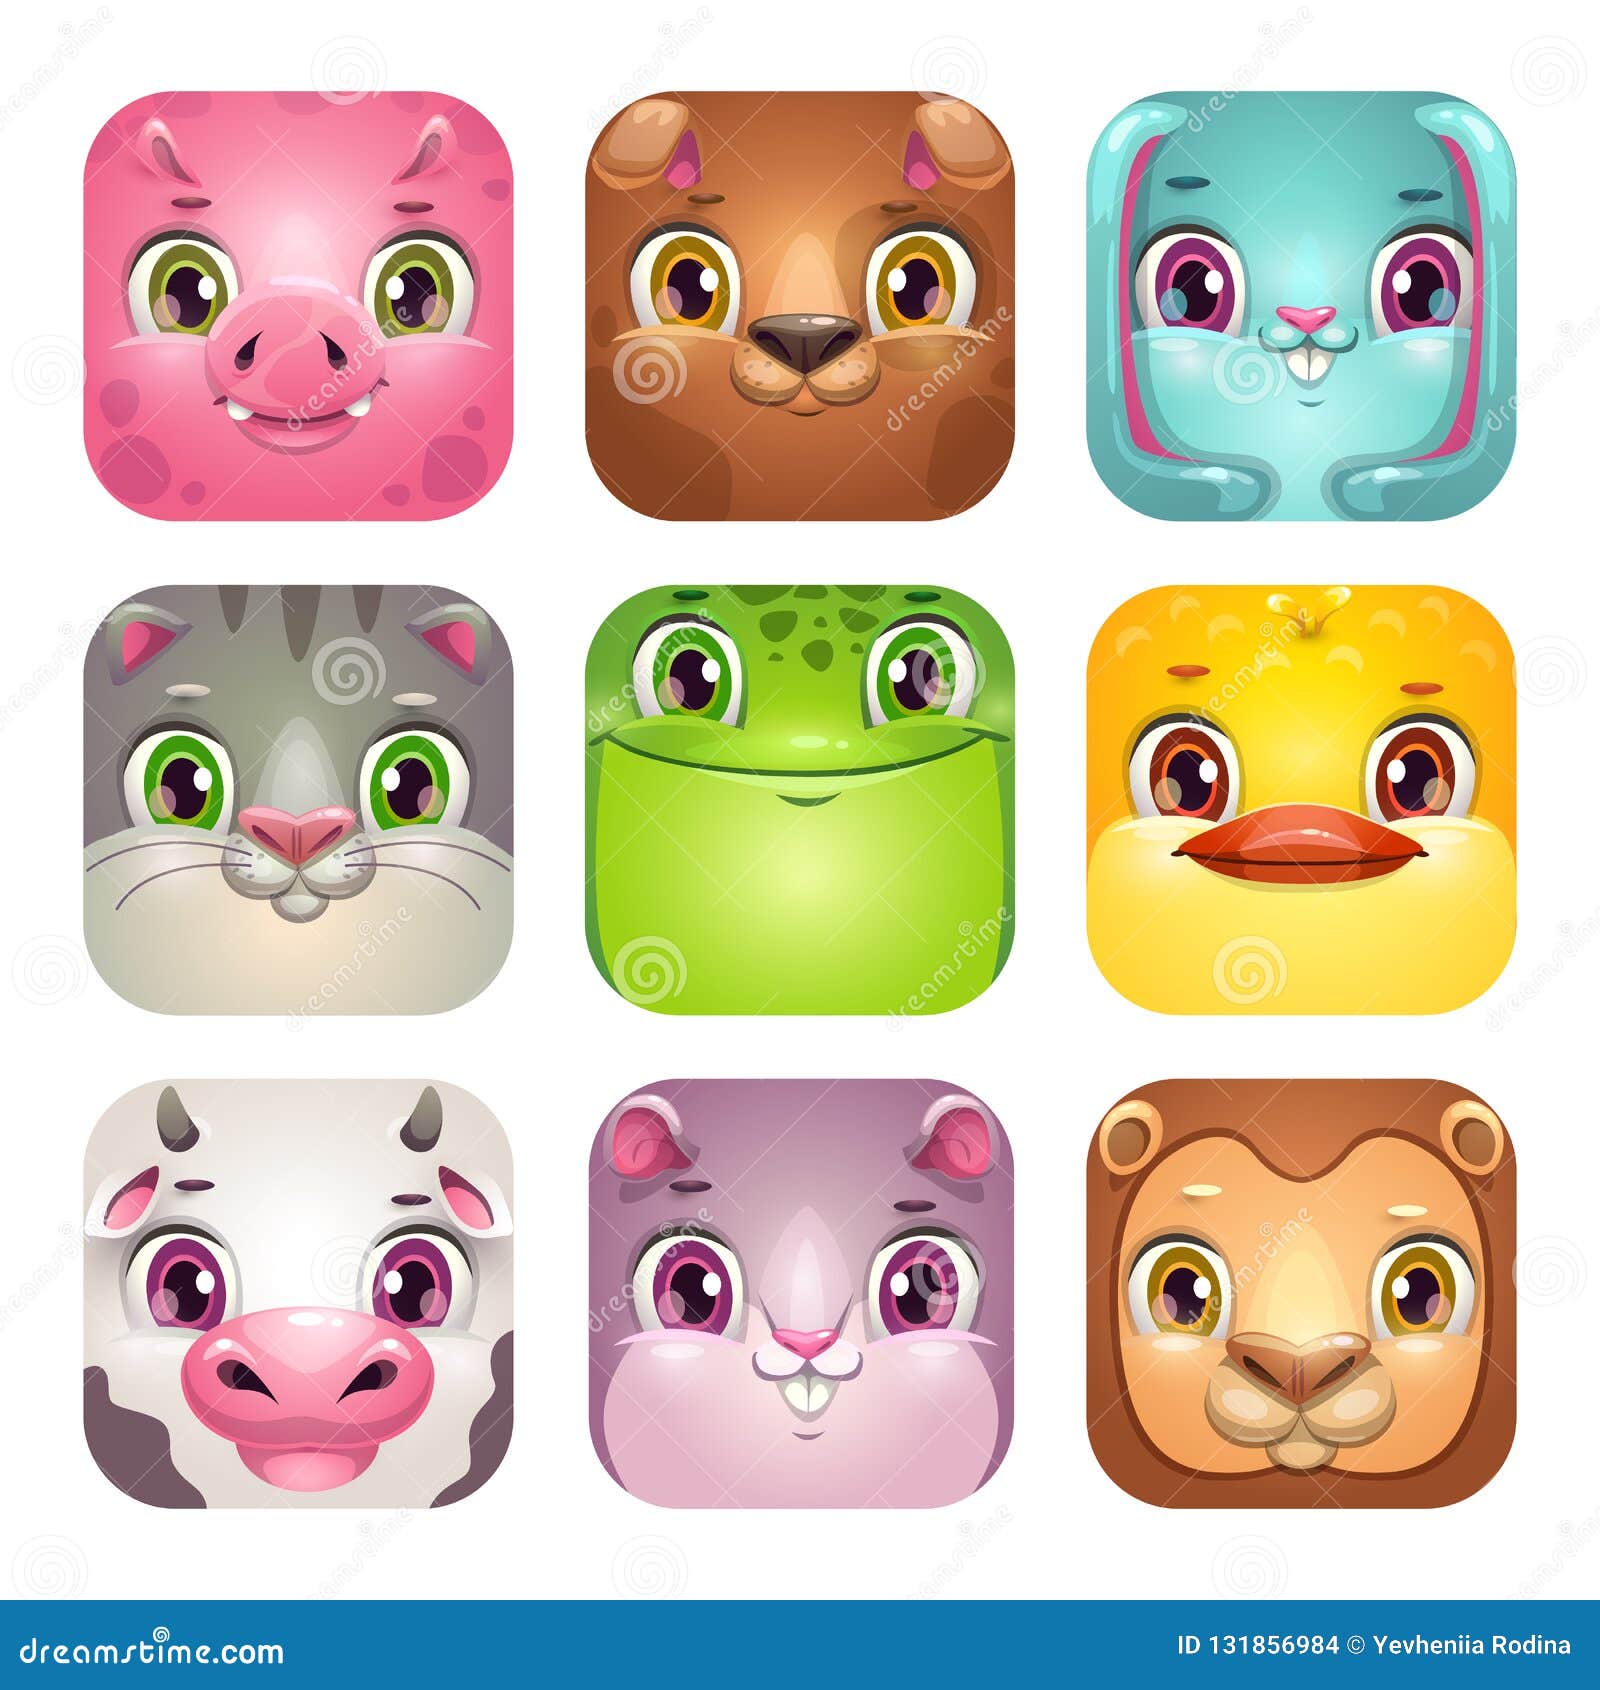 Funny Cartoon Square Animal Faces. App Icons Set for Childish Game Logo  Design Stock Vector - Illustration of childish, mouse: 131856984